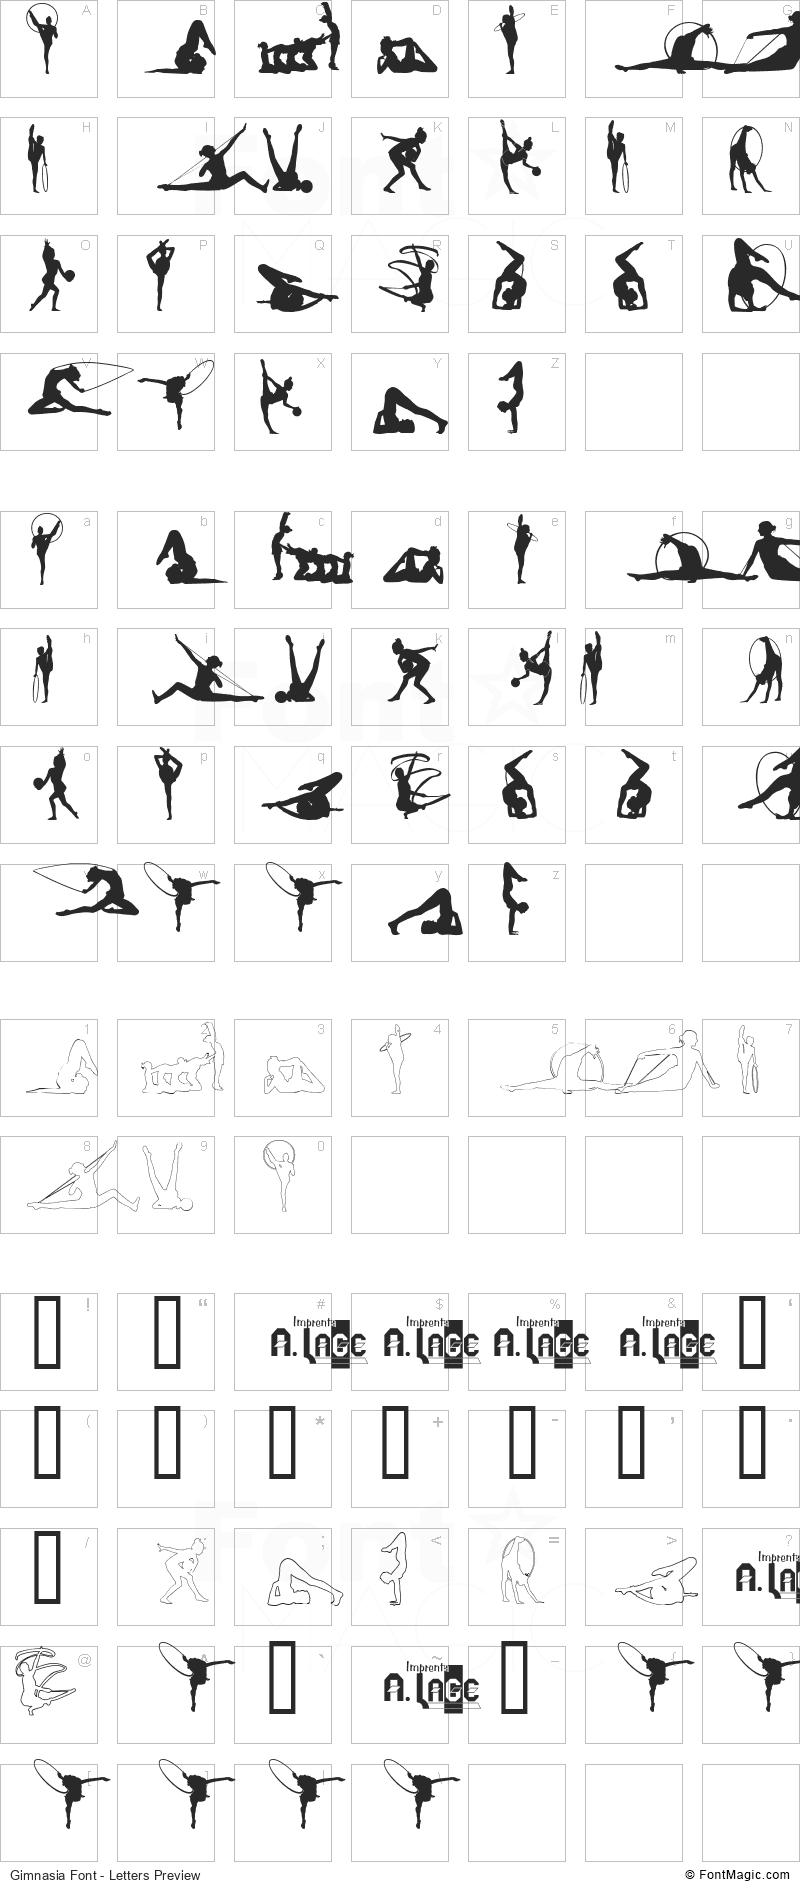 Gimnasia Font - All Latters Preview Chart